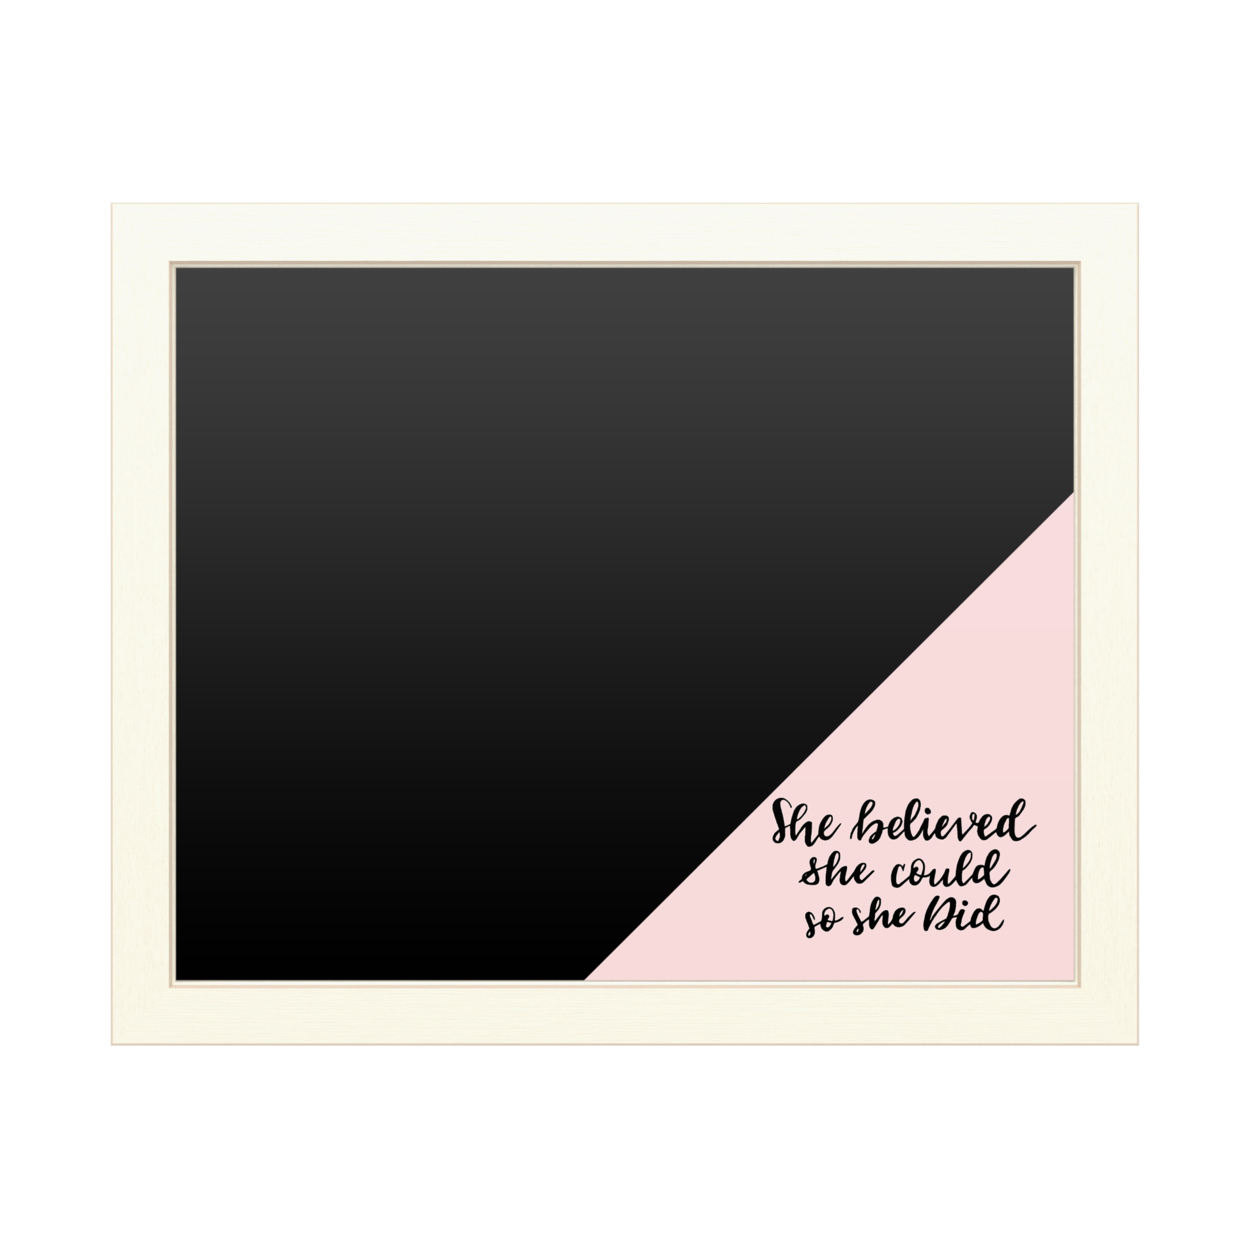 16 X 20 Chalk Board With Printed Artwork - She Believed She Could Pink White Board - Ready To Hang Chalkboard